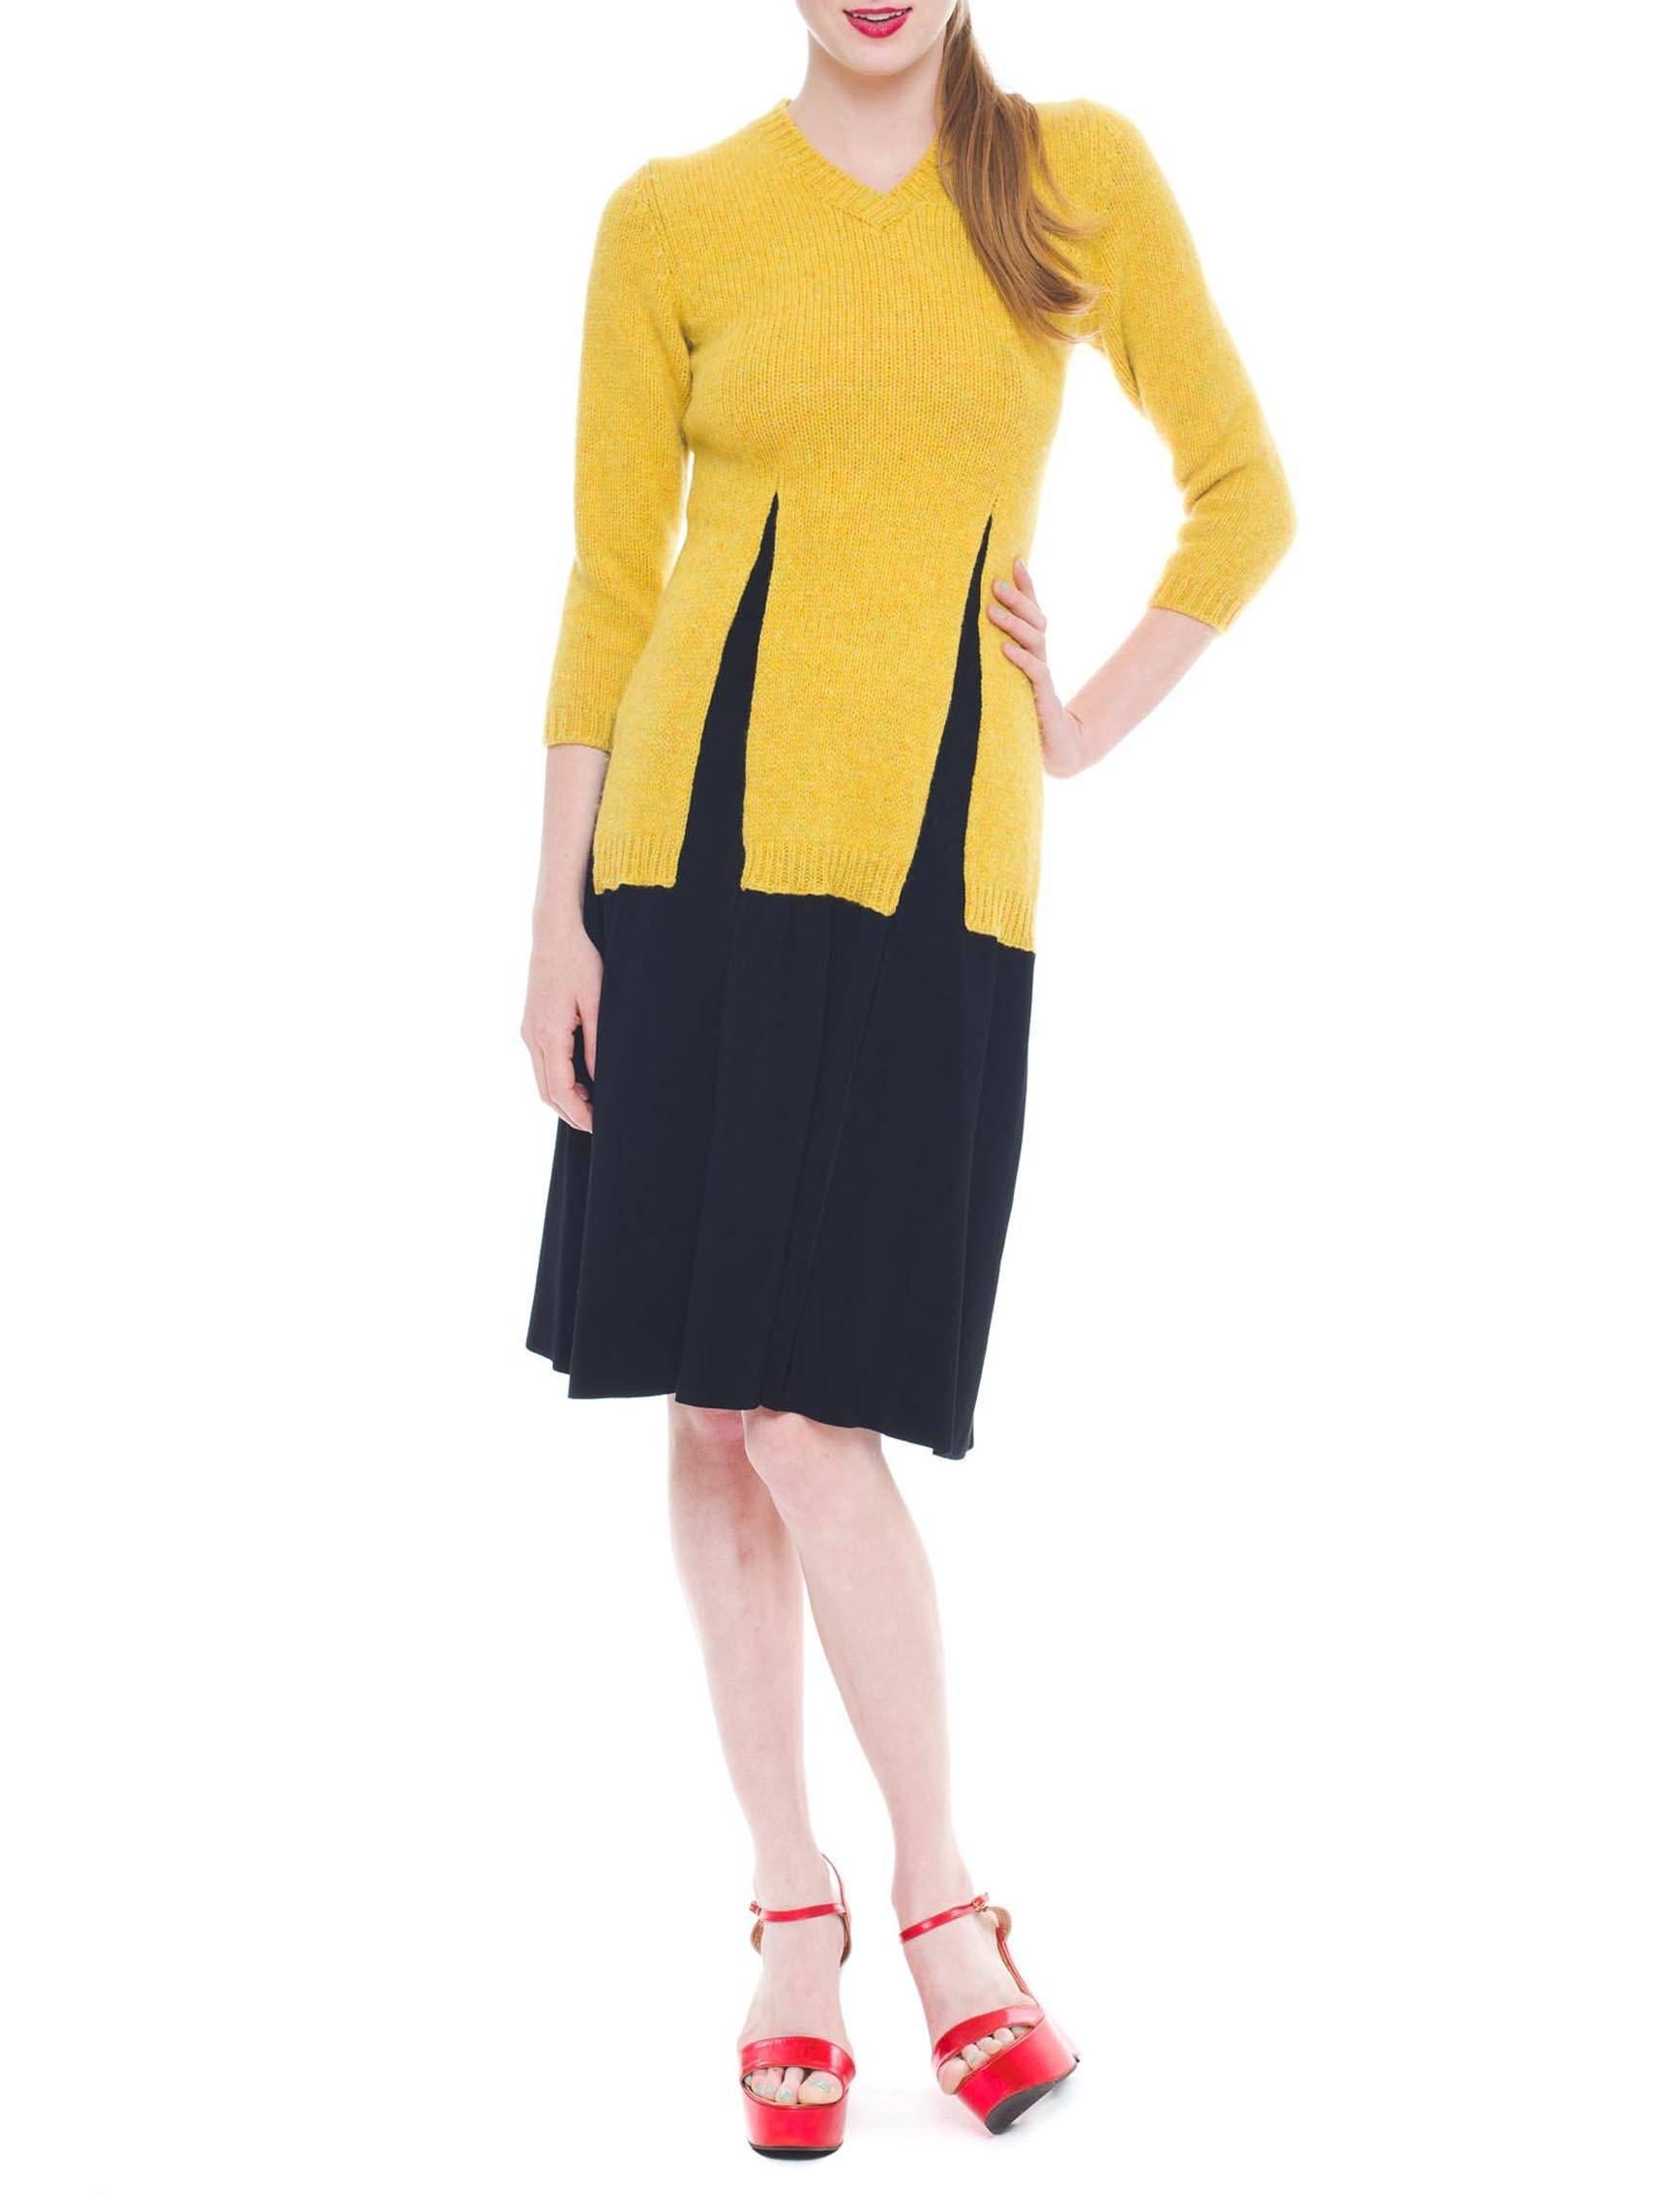 This is a cool dress in black and yellow, designed to look like a sweater over a skirt. The upper section is a textured sweater stockinette in a soft but sunny yellow, while the skirt is made of a finer black knit. The sweater portion has been knit